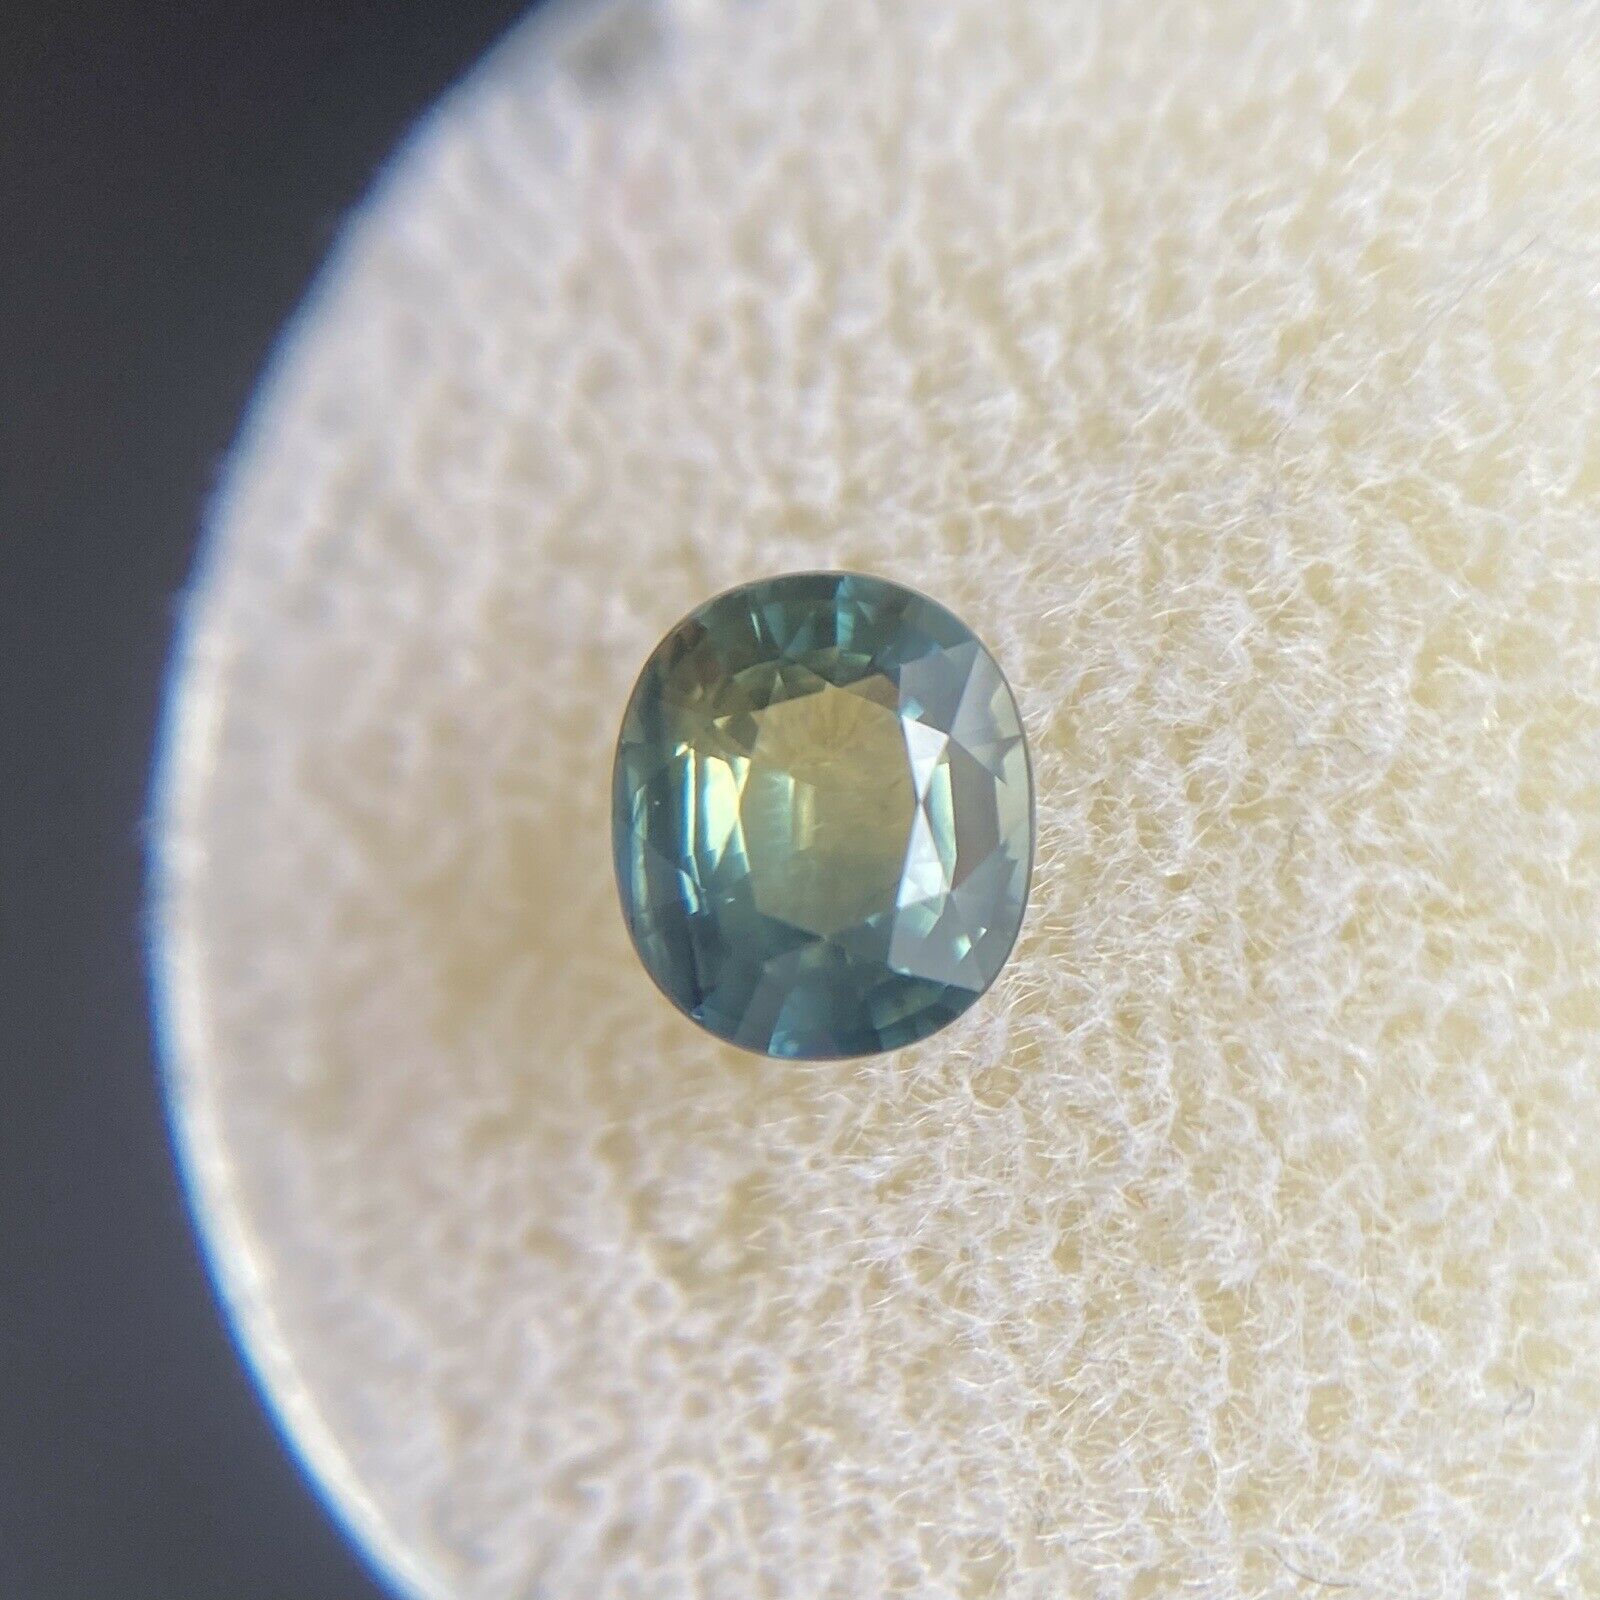 Rare Parti Colour Sapphire 1.22ct Blue Green Yellow Oval Cut Loose Gem 6.6 x 5.7mm

Natural Greenish Yellow Blue Parti-Colour Sapphire Gemstone. 
1.22 Carat with a beautiful and unique greenish yellow blue colour and excellent clarity, a very clean